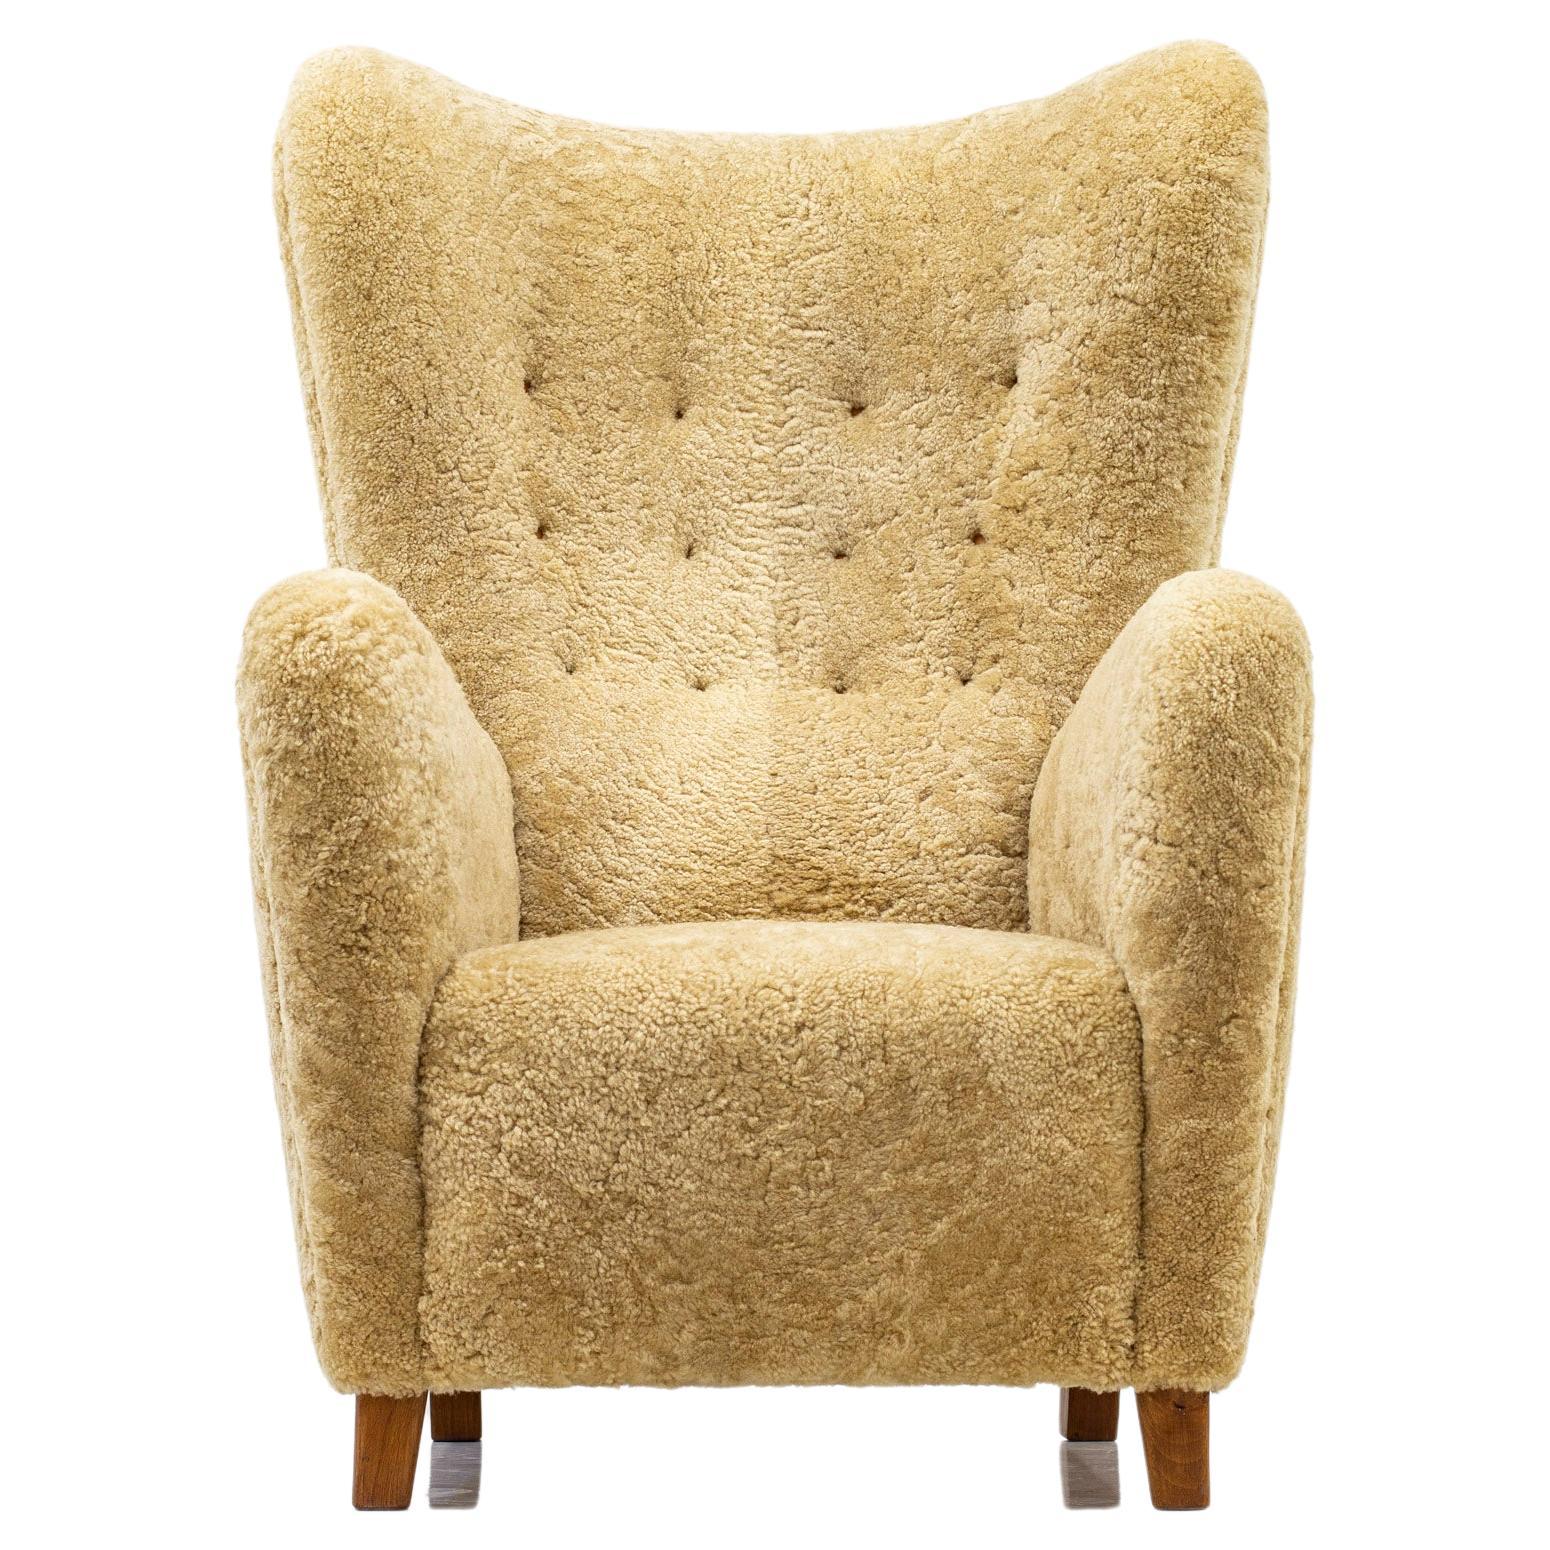 "1672" Wingback Chair by Fritz Hansen, with Sheep Skin, Denmark, 1930s